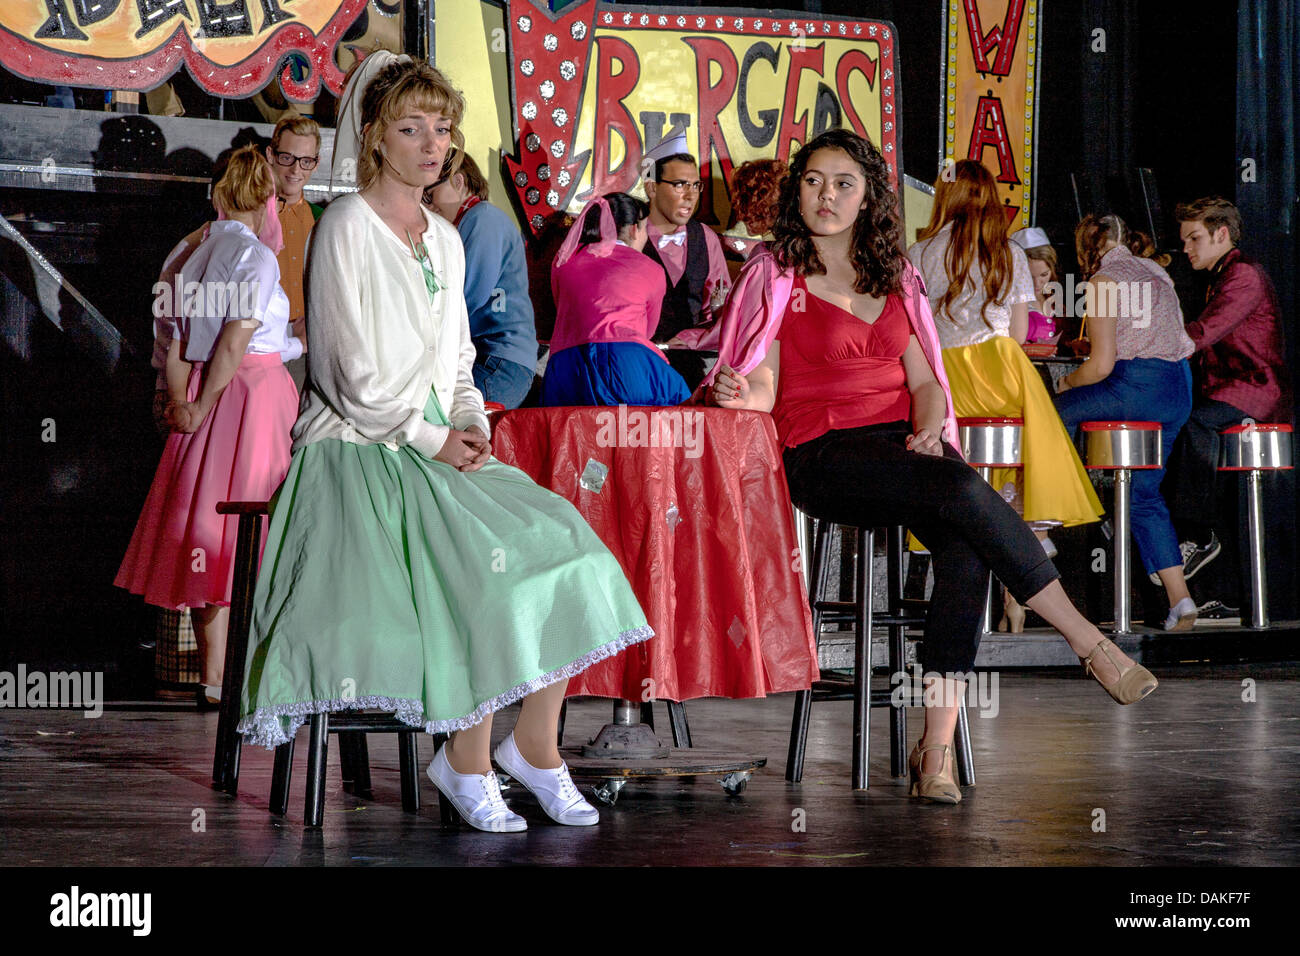 In 1950's clothing, Sandy Dumbrowski (left) and Rizzo talk at Rydell High School in a student production of the musical 'Grease' Stock Photo